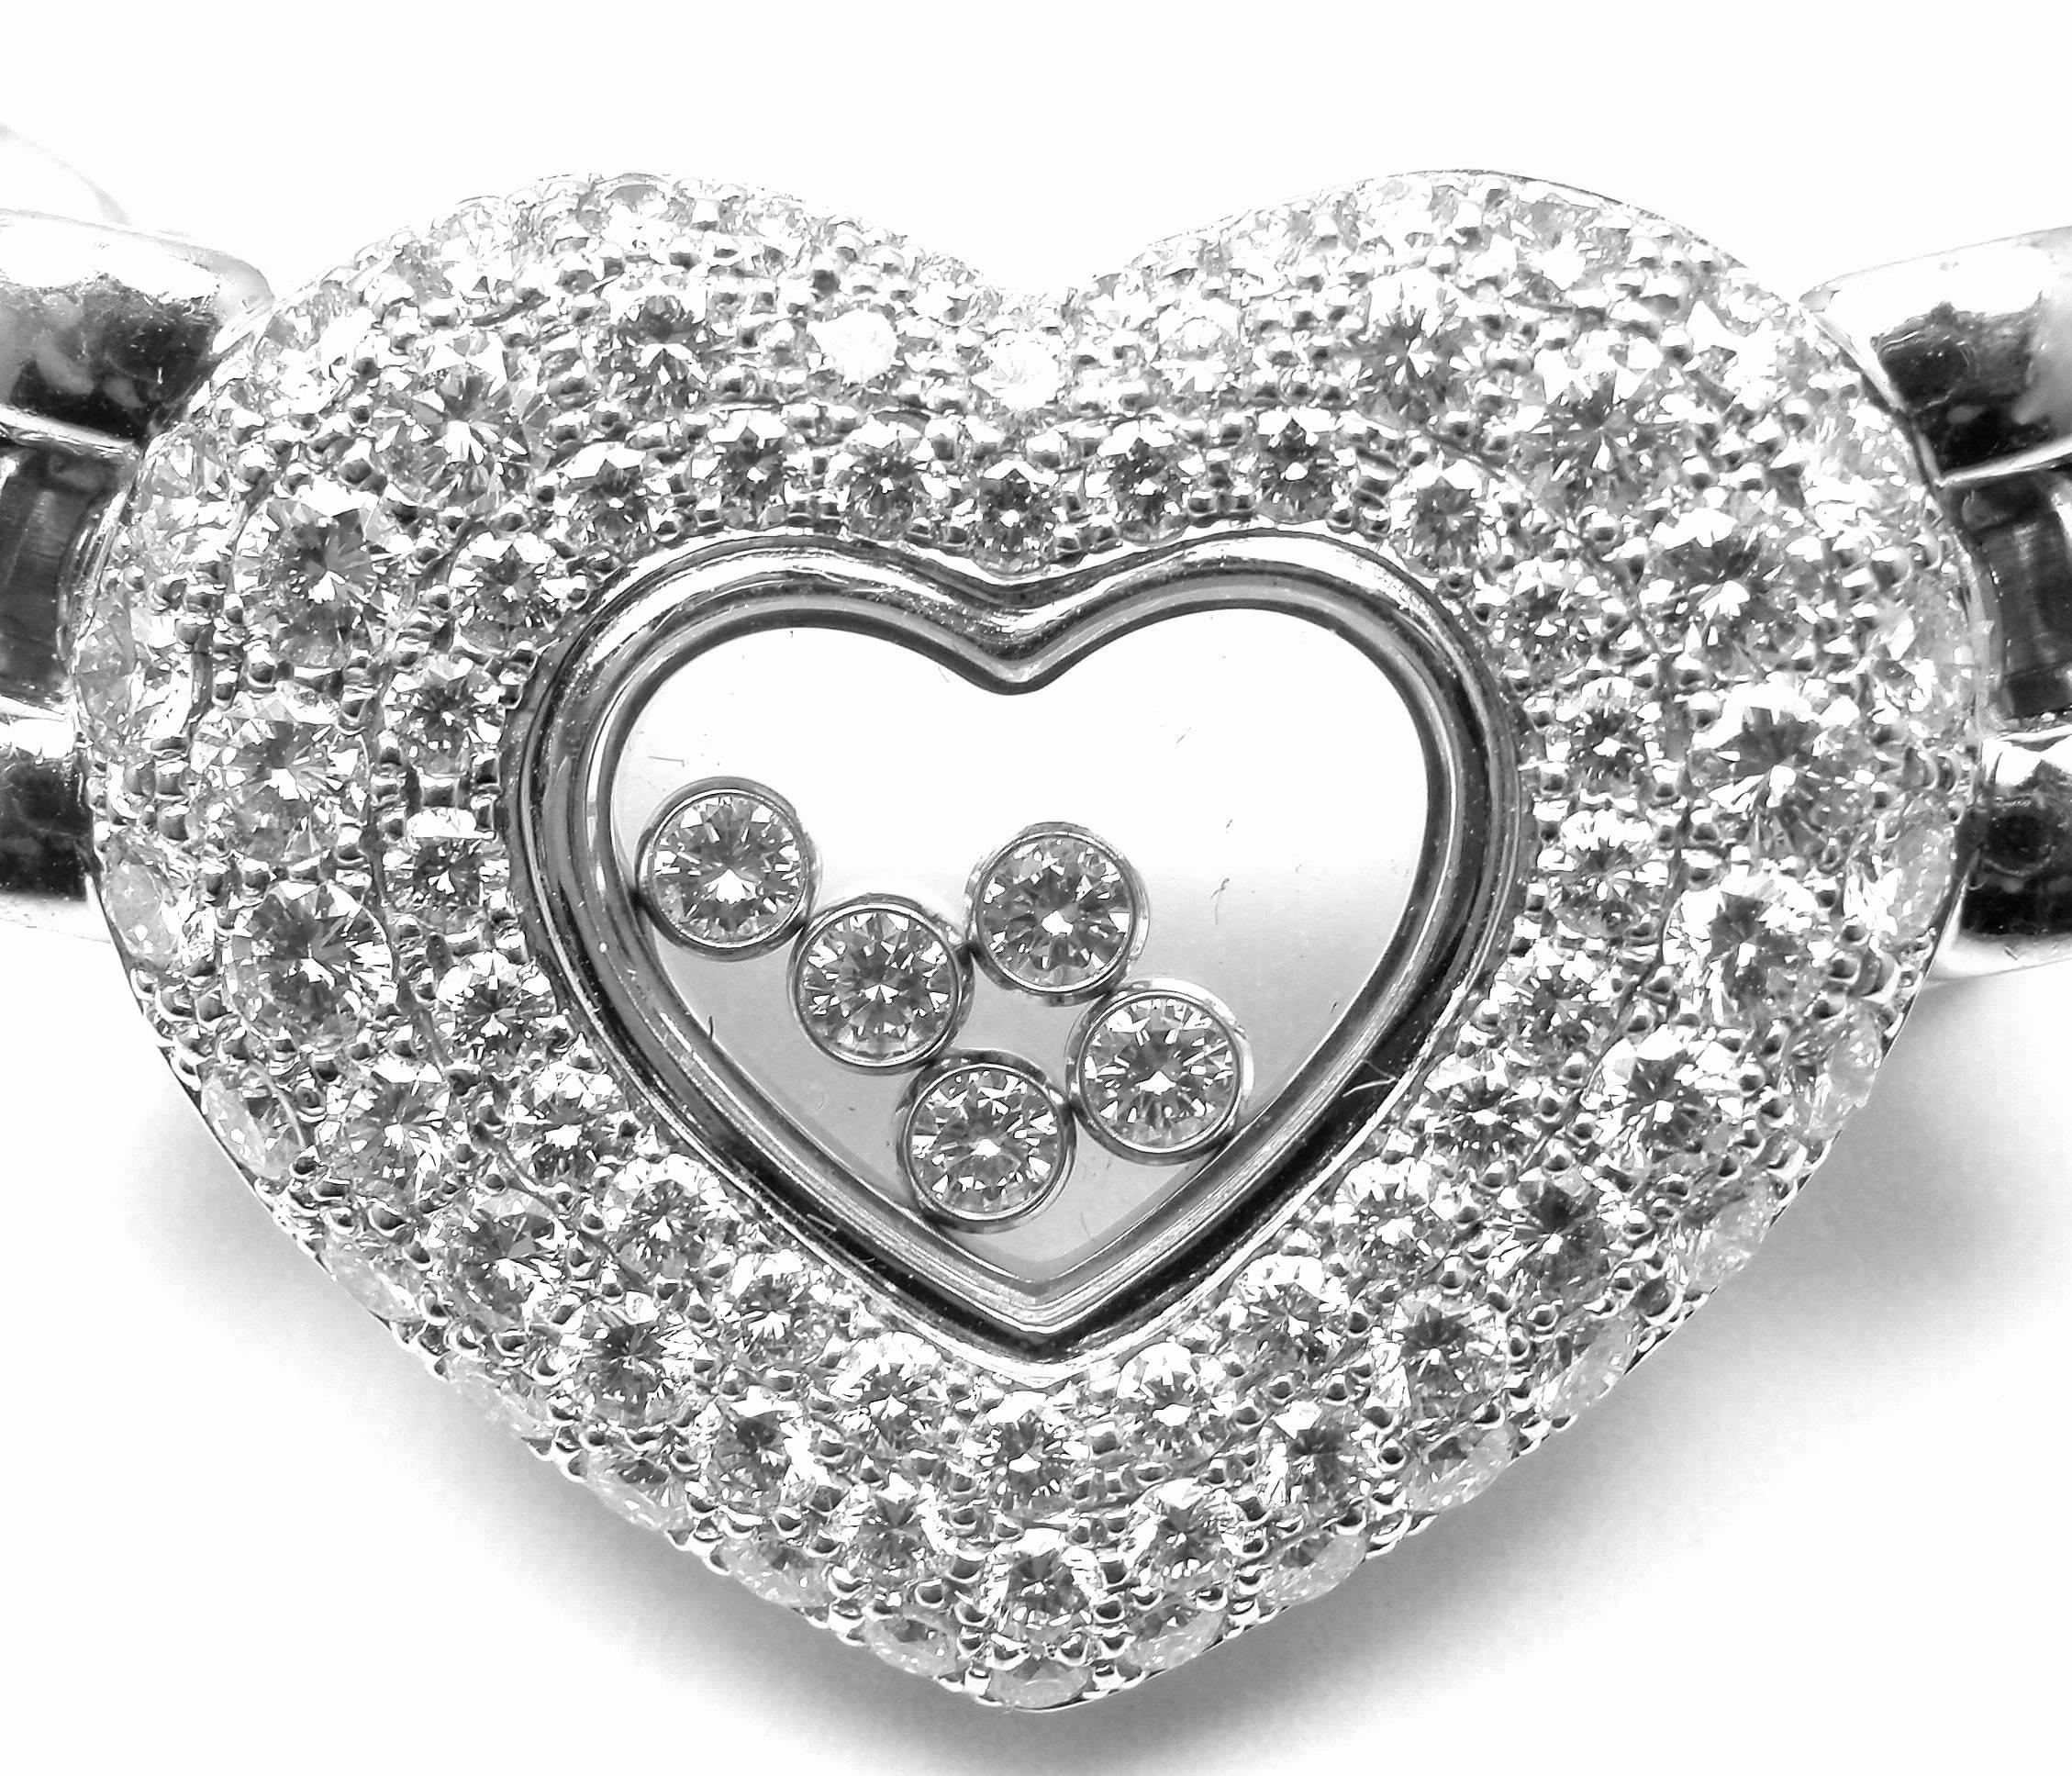 18k White Gold Happy Diamonds Diamond Heart Necklace by Chopard. 
With 83 round brilliant cut diamonds VVS1 clarity, E color total weight approx. 2.59ct

Details:
Chain: Length: 15.5